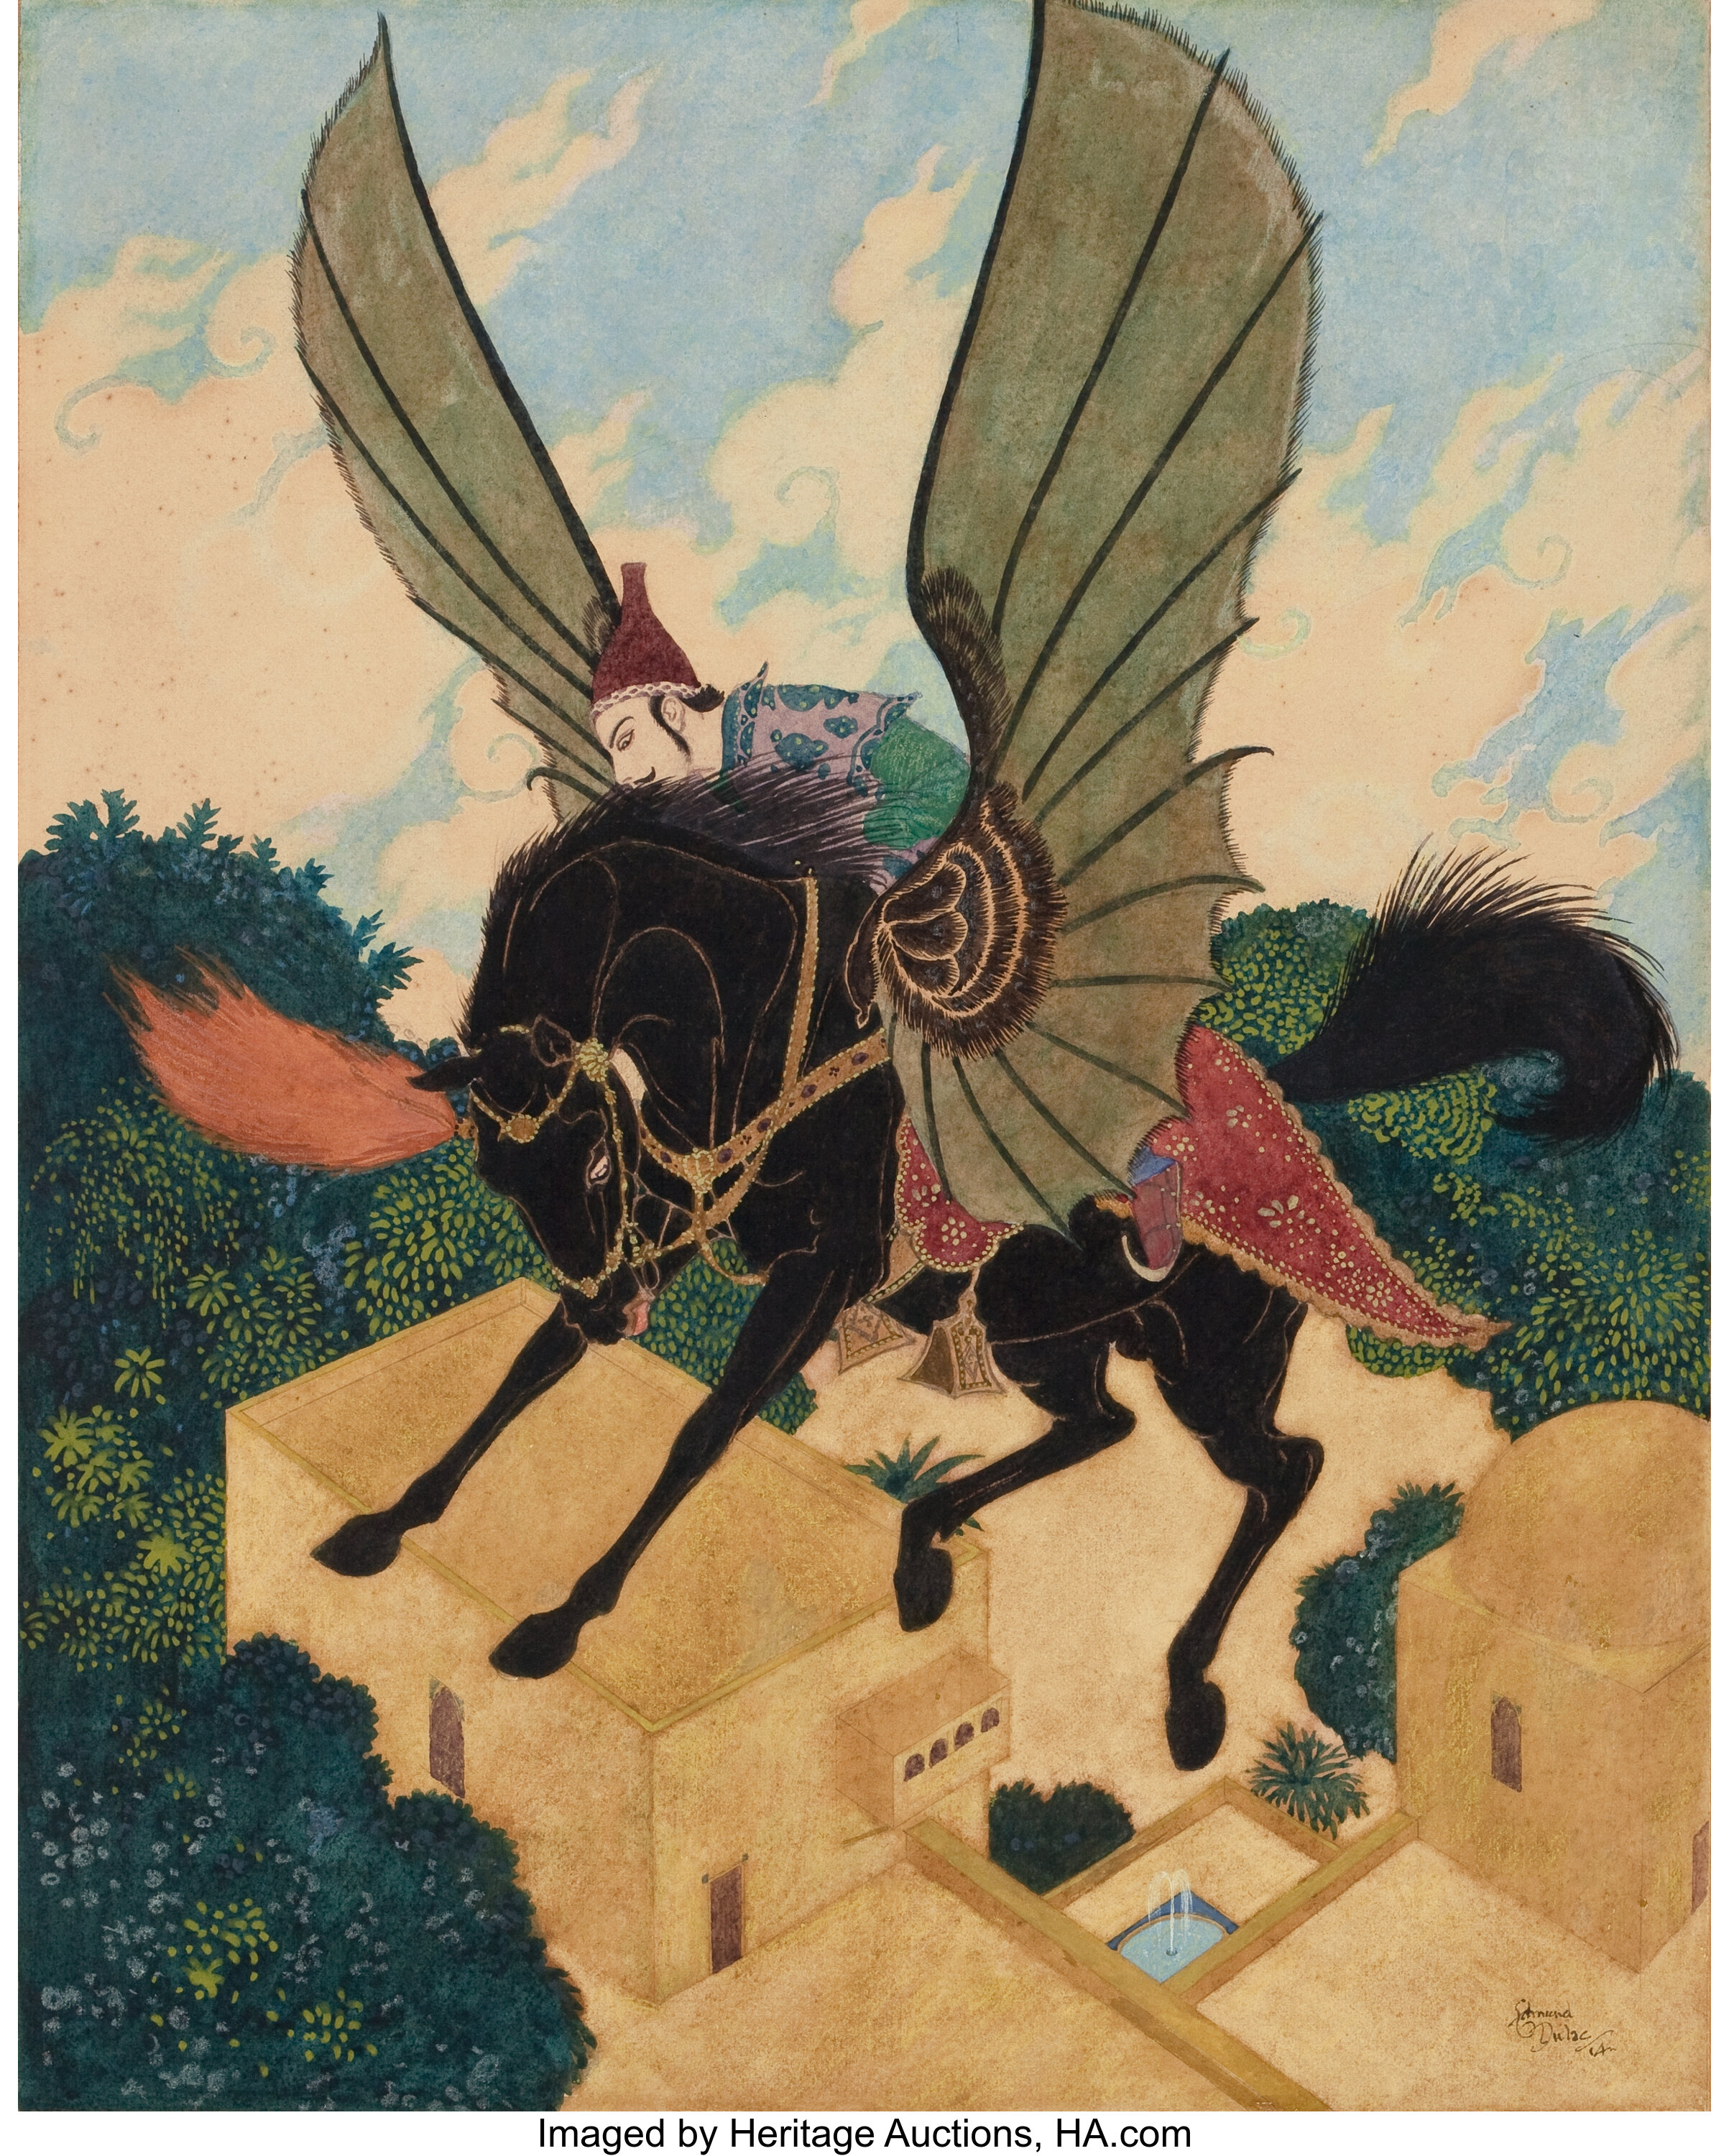 Edmund Dulac Paintings for Sale | Value Guide | Heritage Auctions